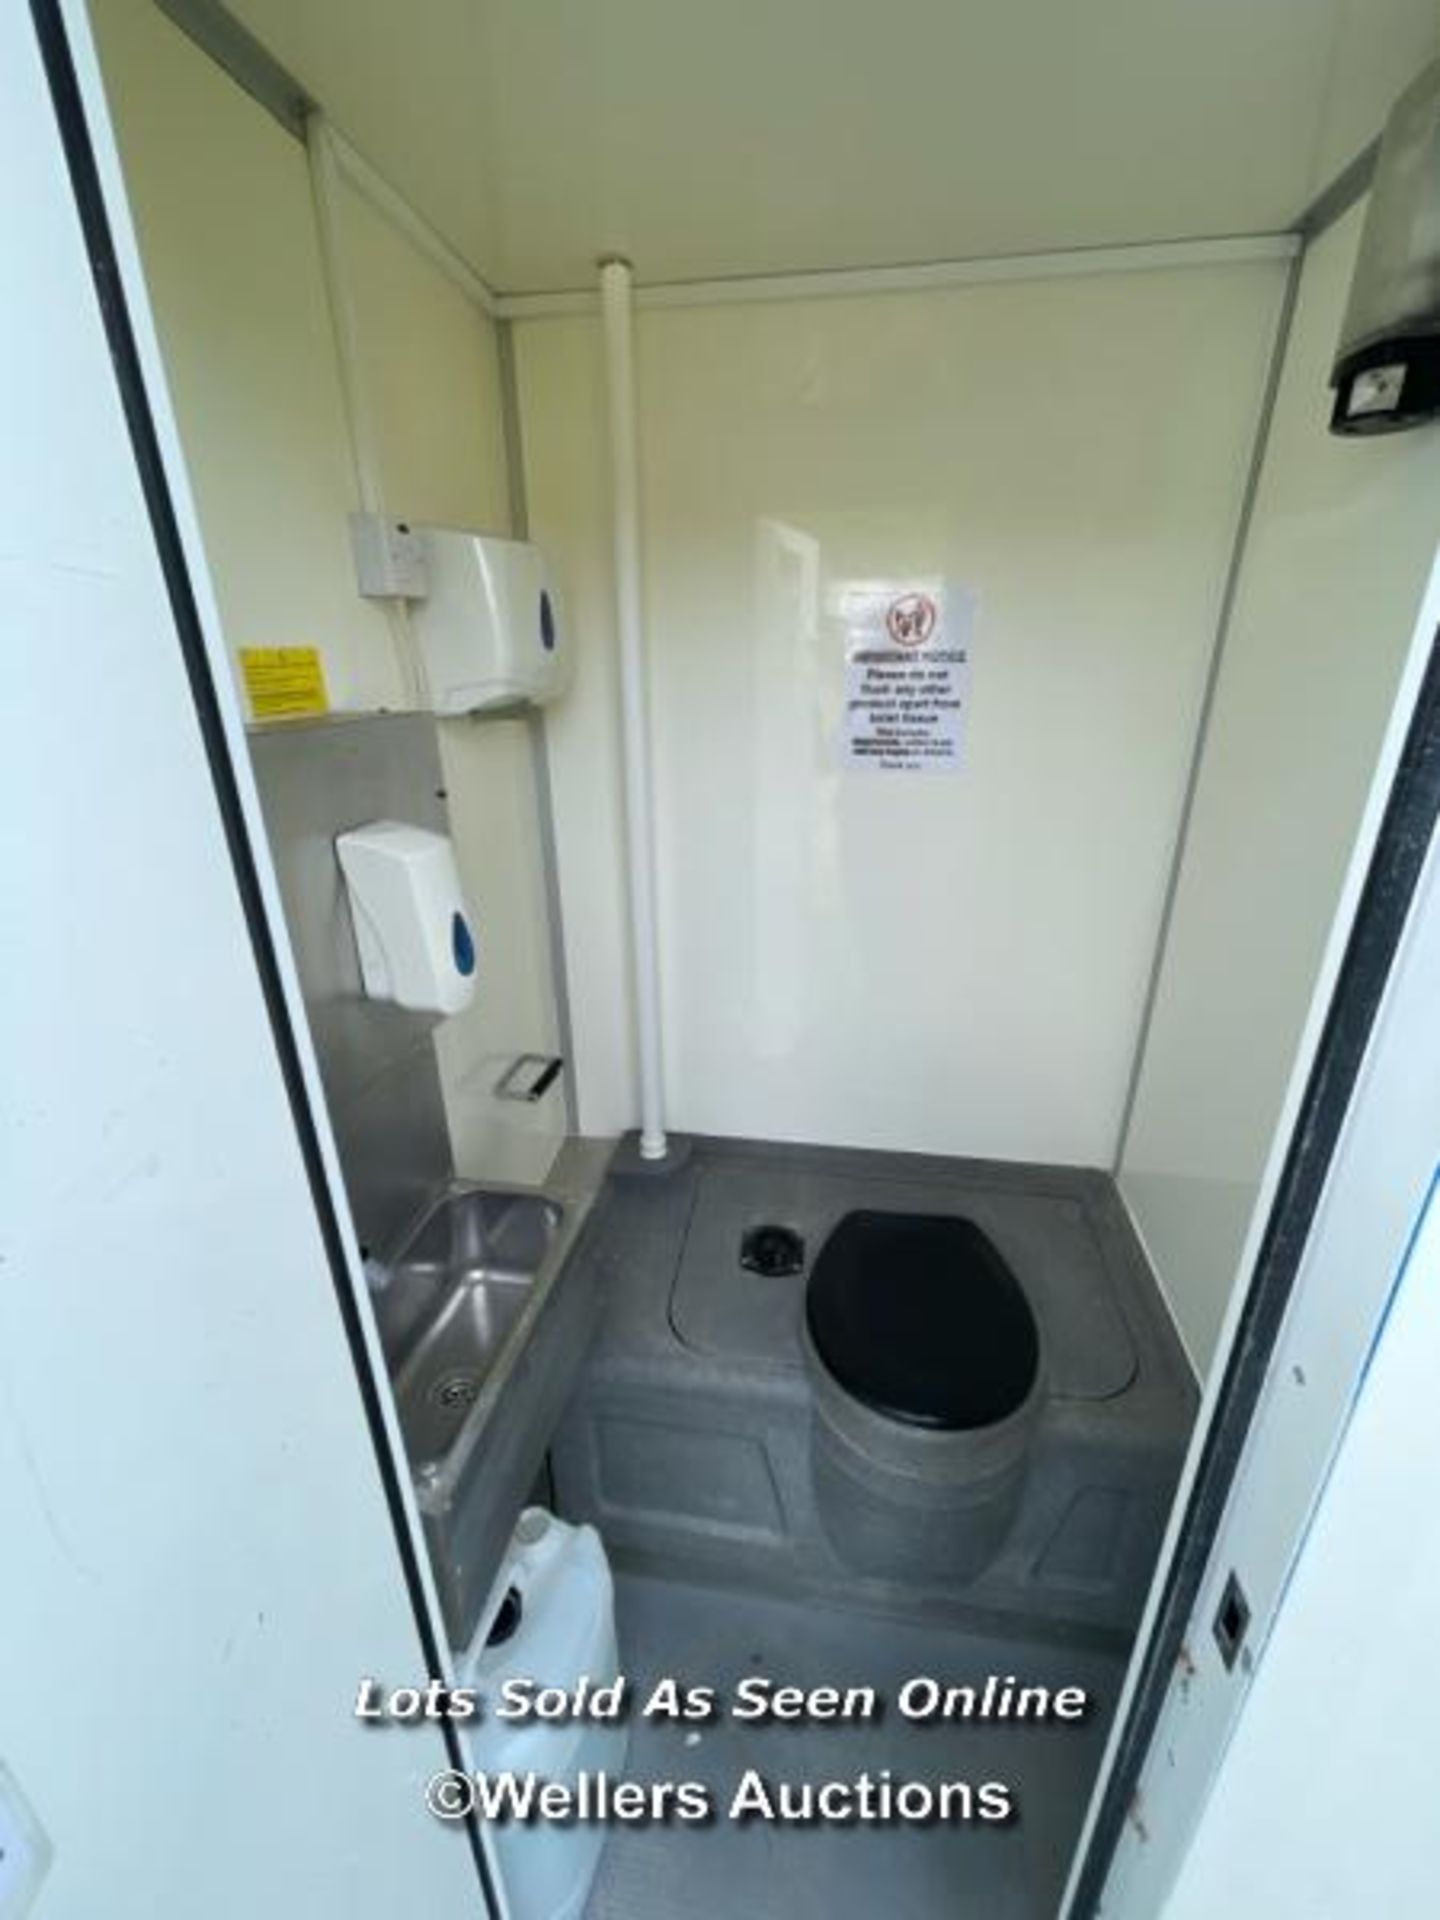 6 PERSON 12 X 7.5FT AJC EASY CABIN TOWABLE WELFARE UNIT, INCLUDES WASH BASIN, KETTLE, MICROWAVE, - Image 10 of 15